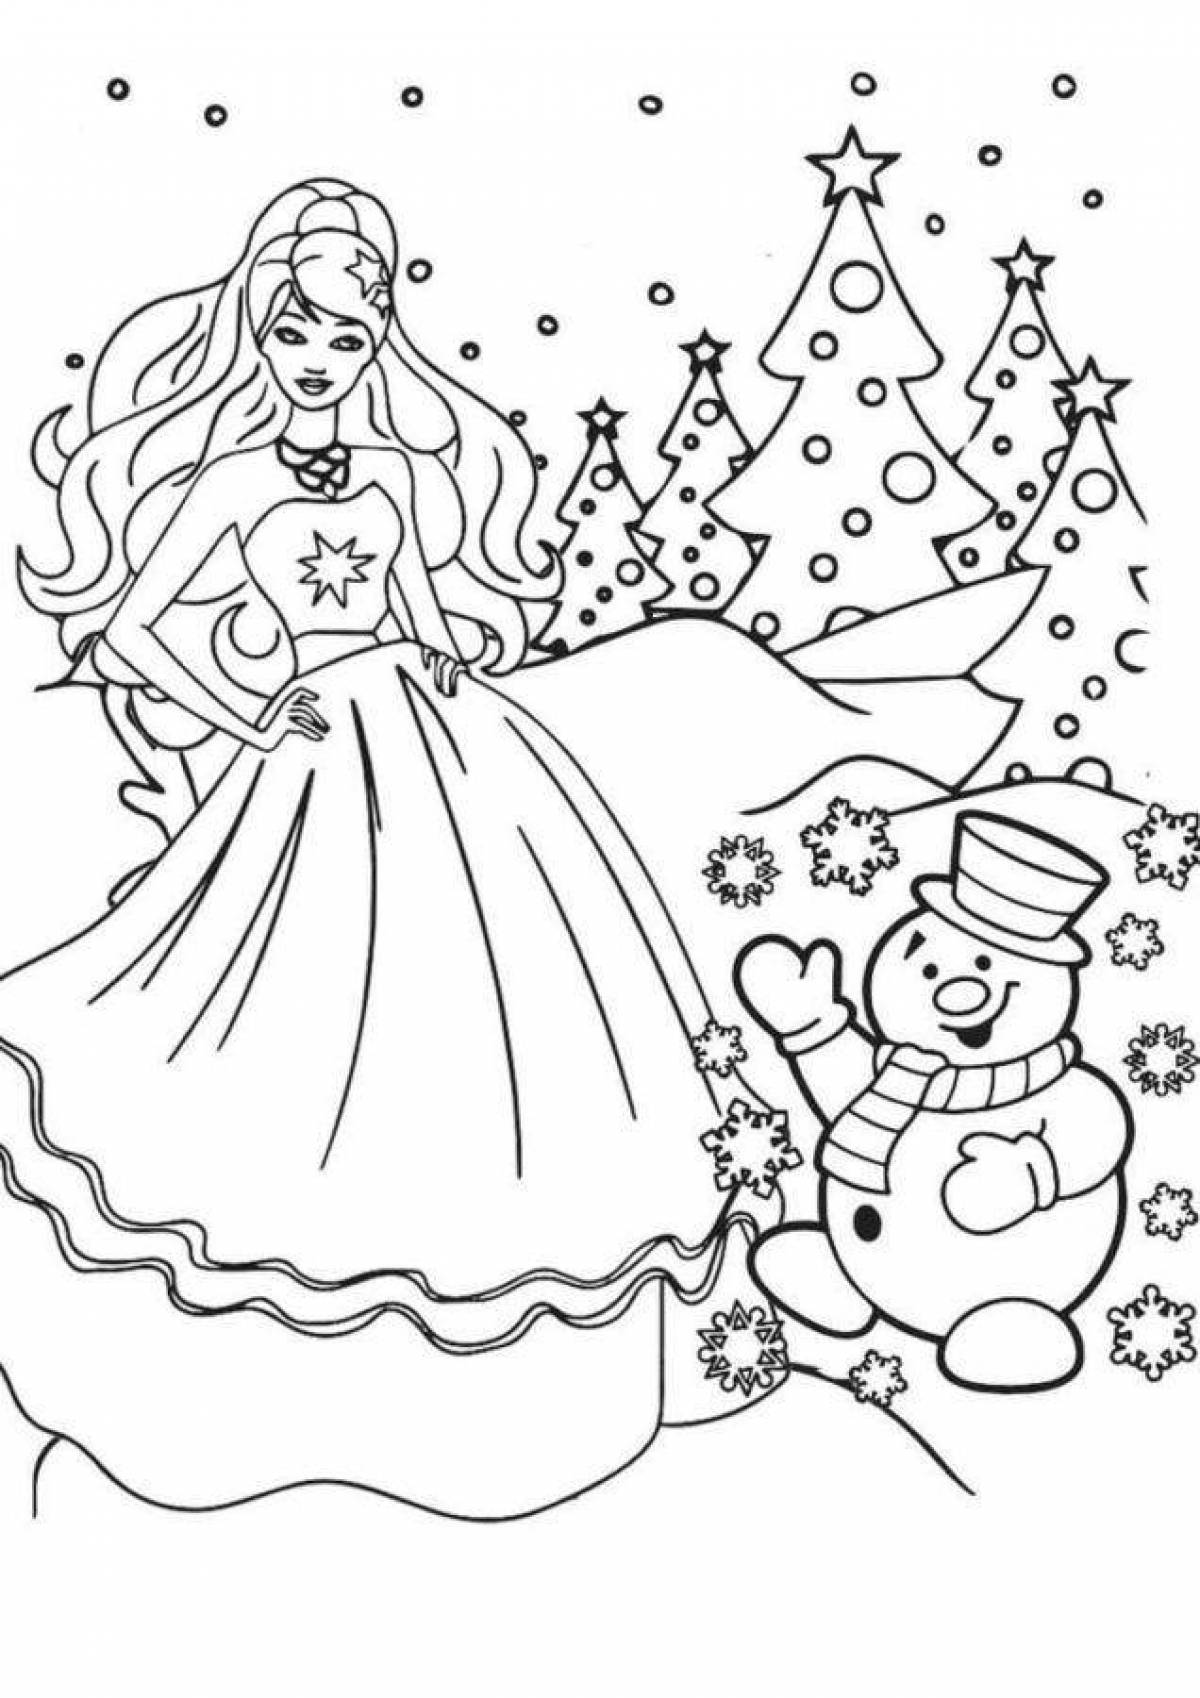 Merry Christmas coloring barbie